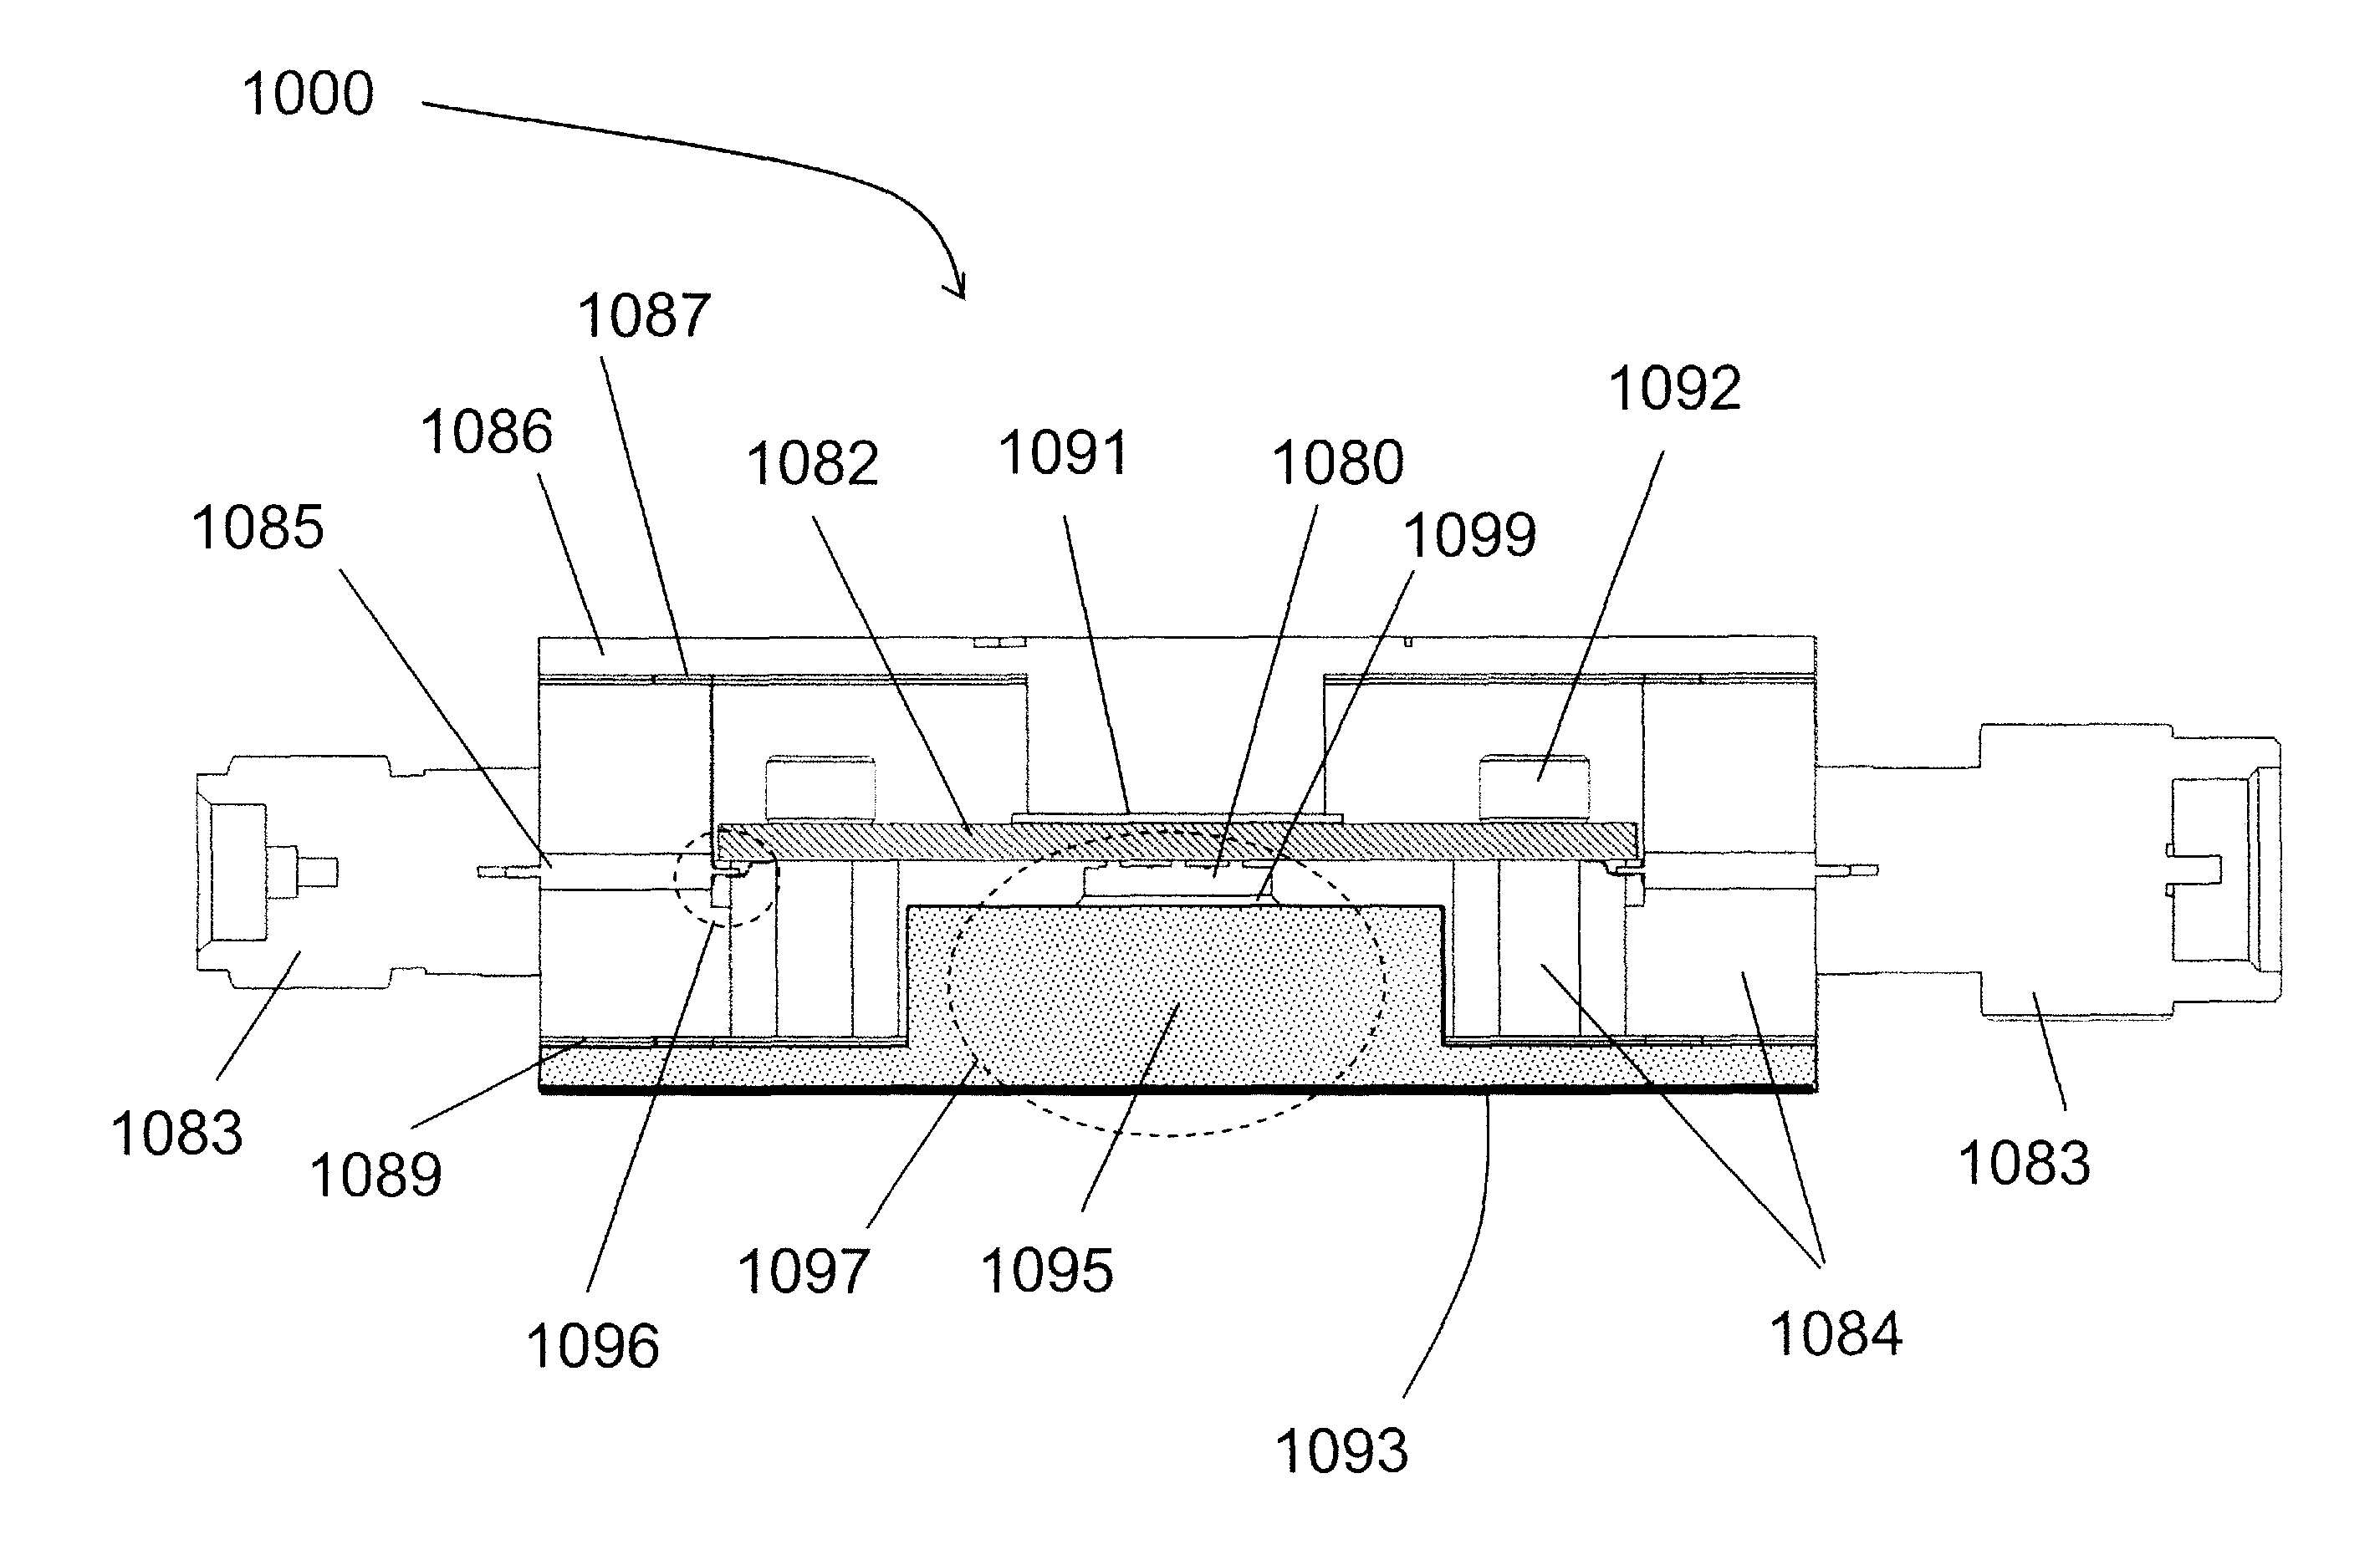 RF and milimeter-wave high-power semiconductor device